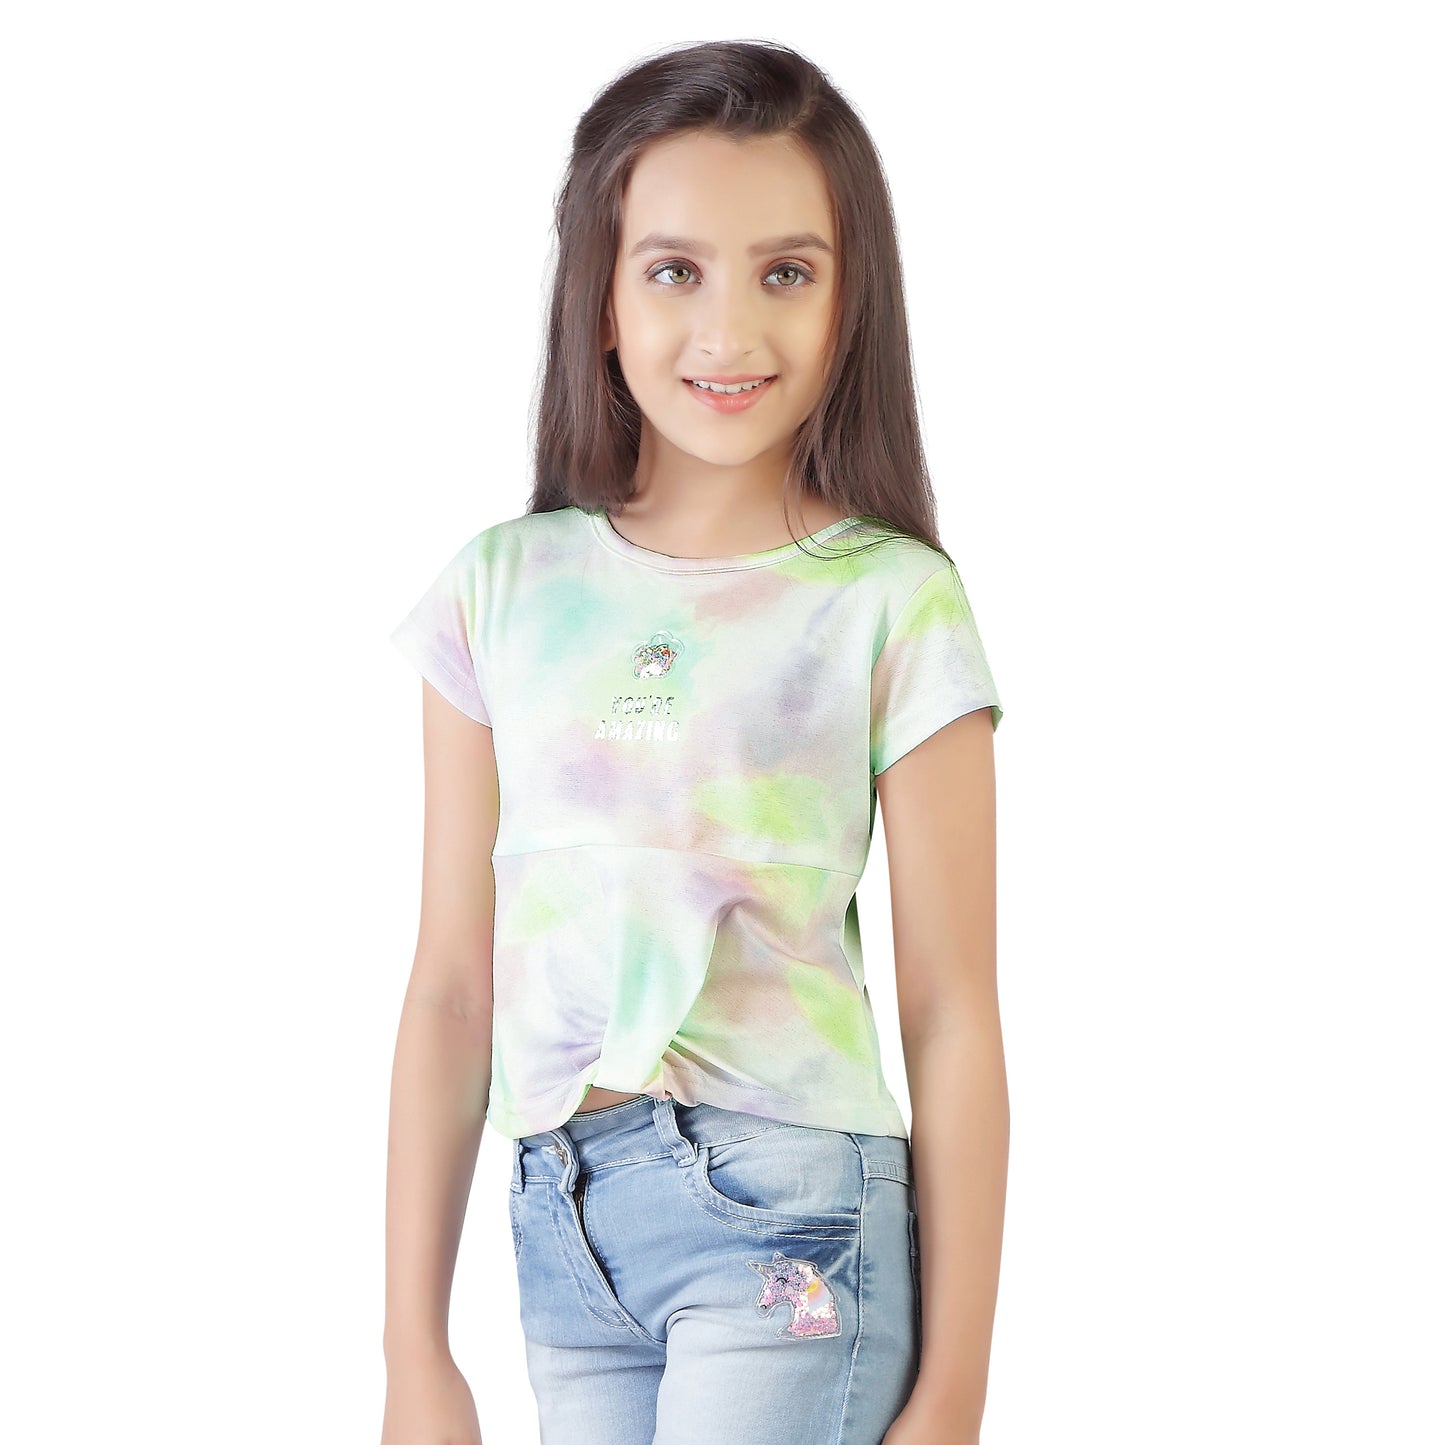 Tie Dye Knitted Top With Hem Knoting And  Silver Foil Print.